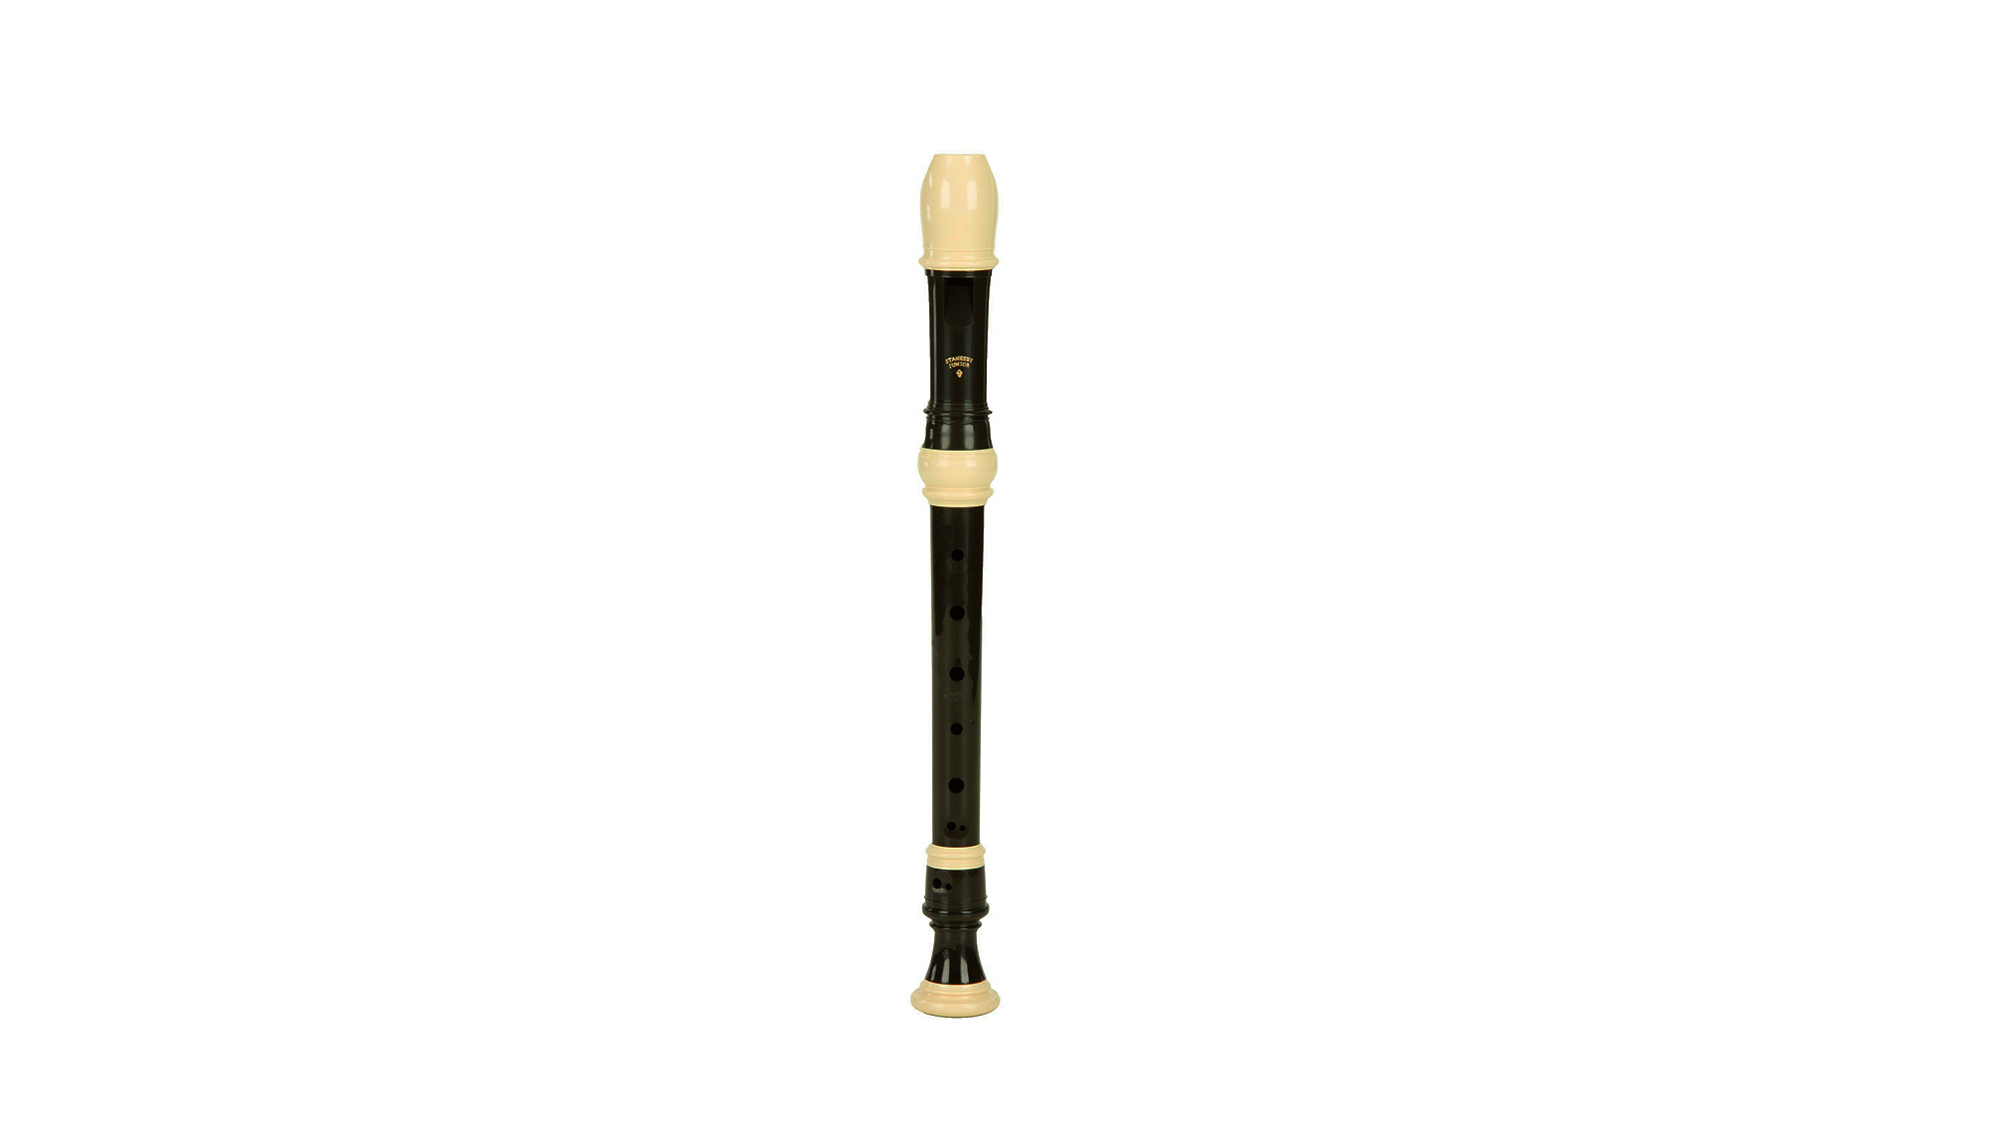 Zen On, "Stanesby", soprano in c``, baroque double hole, 442 Hz, plastic with white trim rings